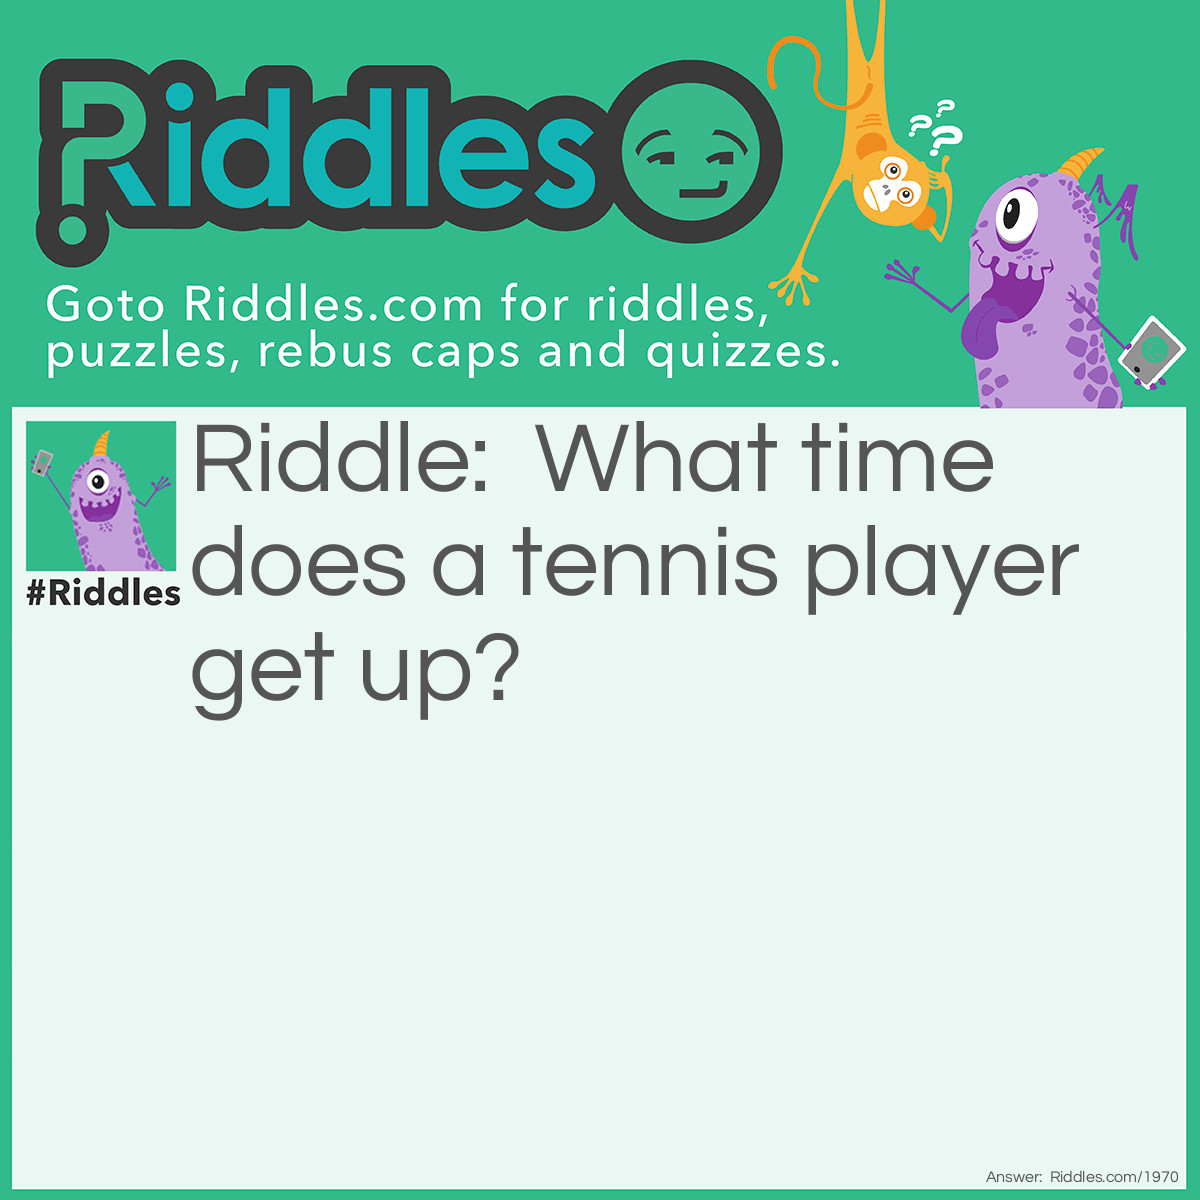 Riddle: What time does a tennis player get up? Answer: Ten-ish.